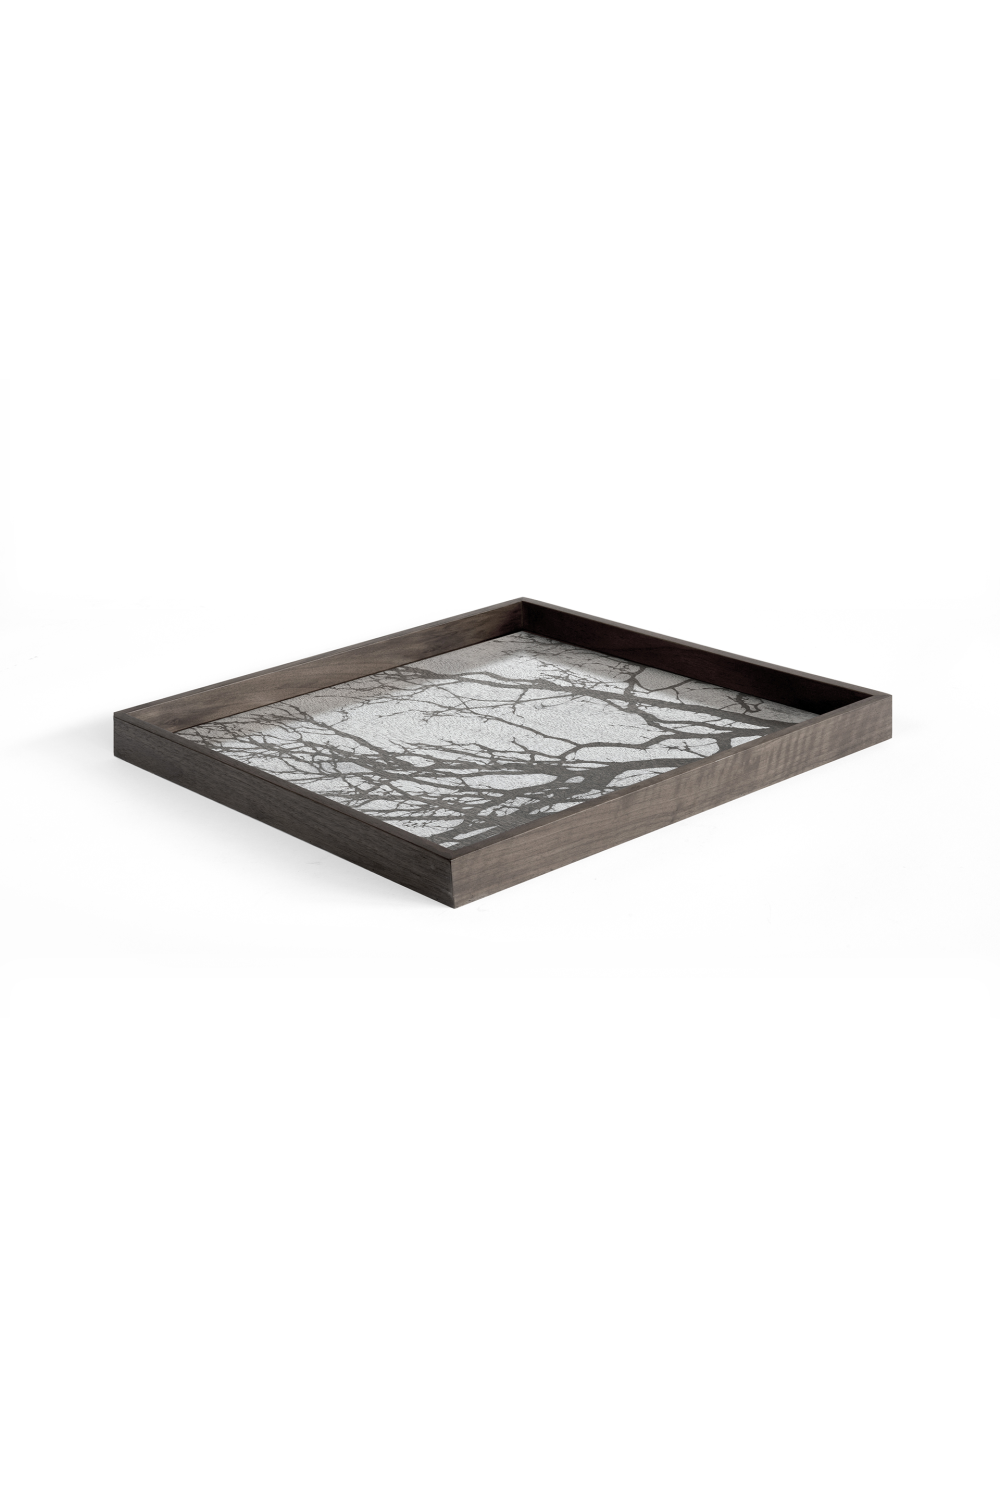 Square Modern Hand-Painted Tray | Ethnicraft White Tree | Oroa.com